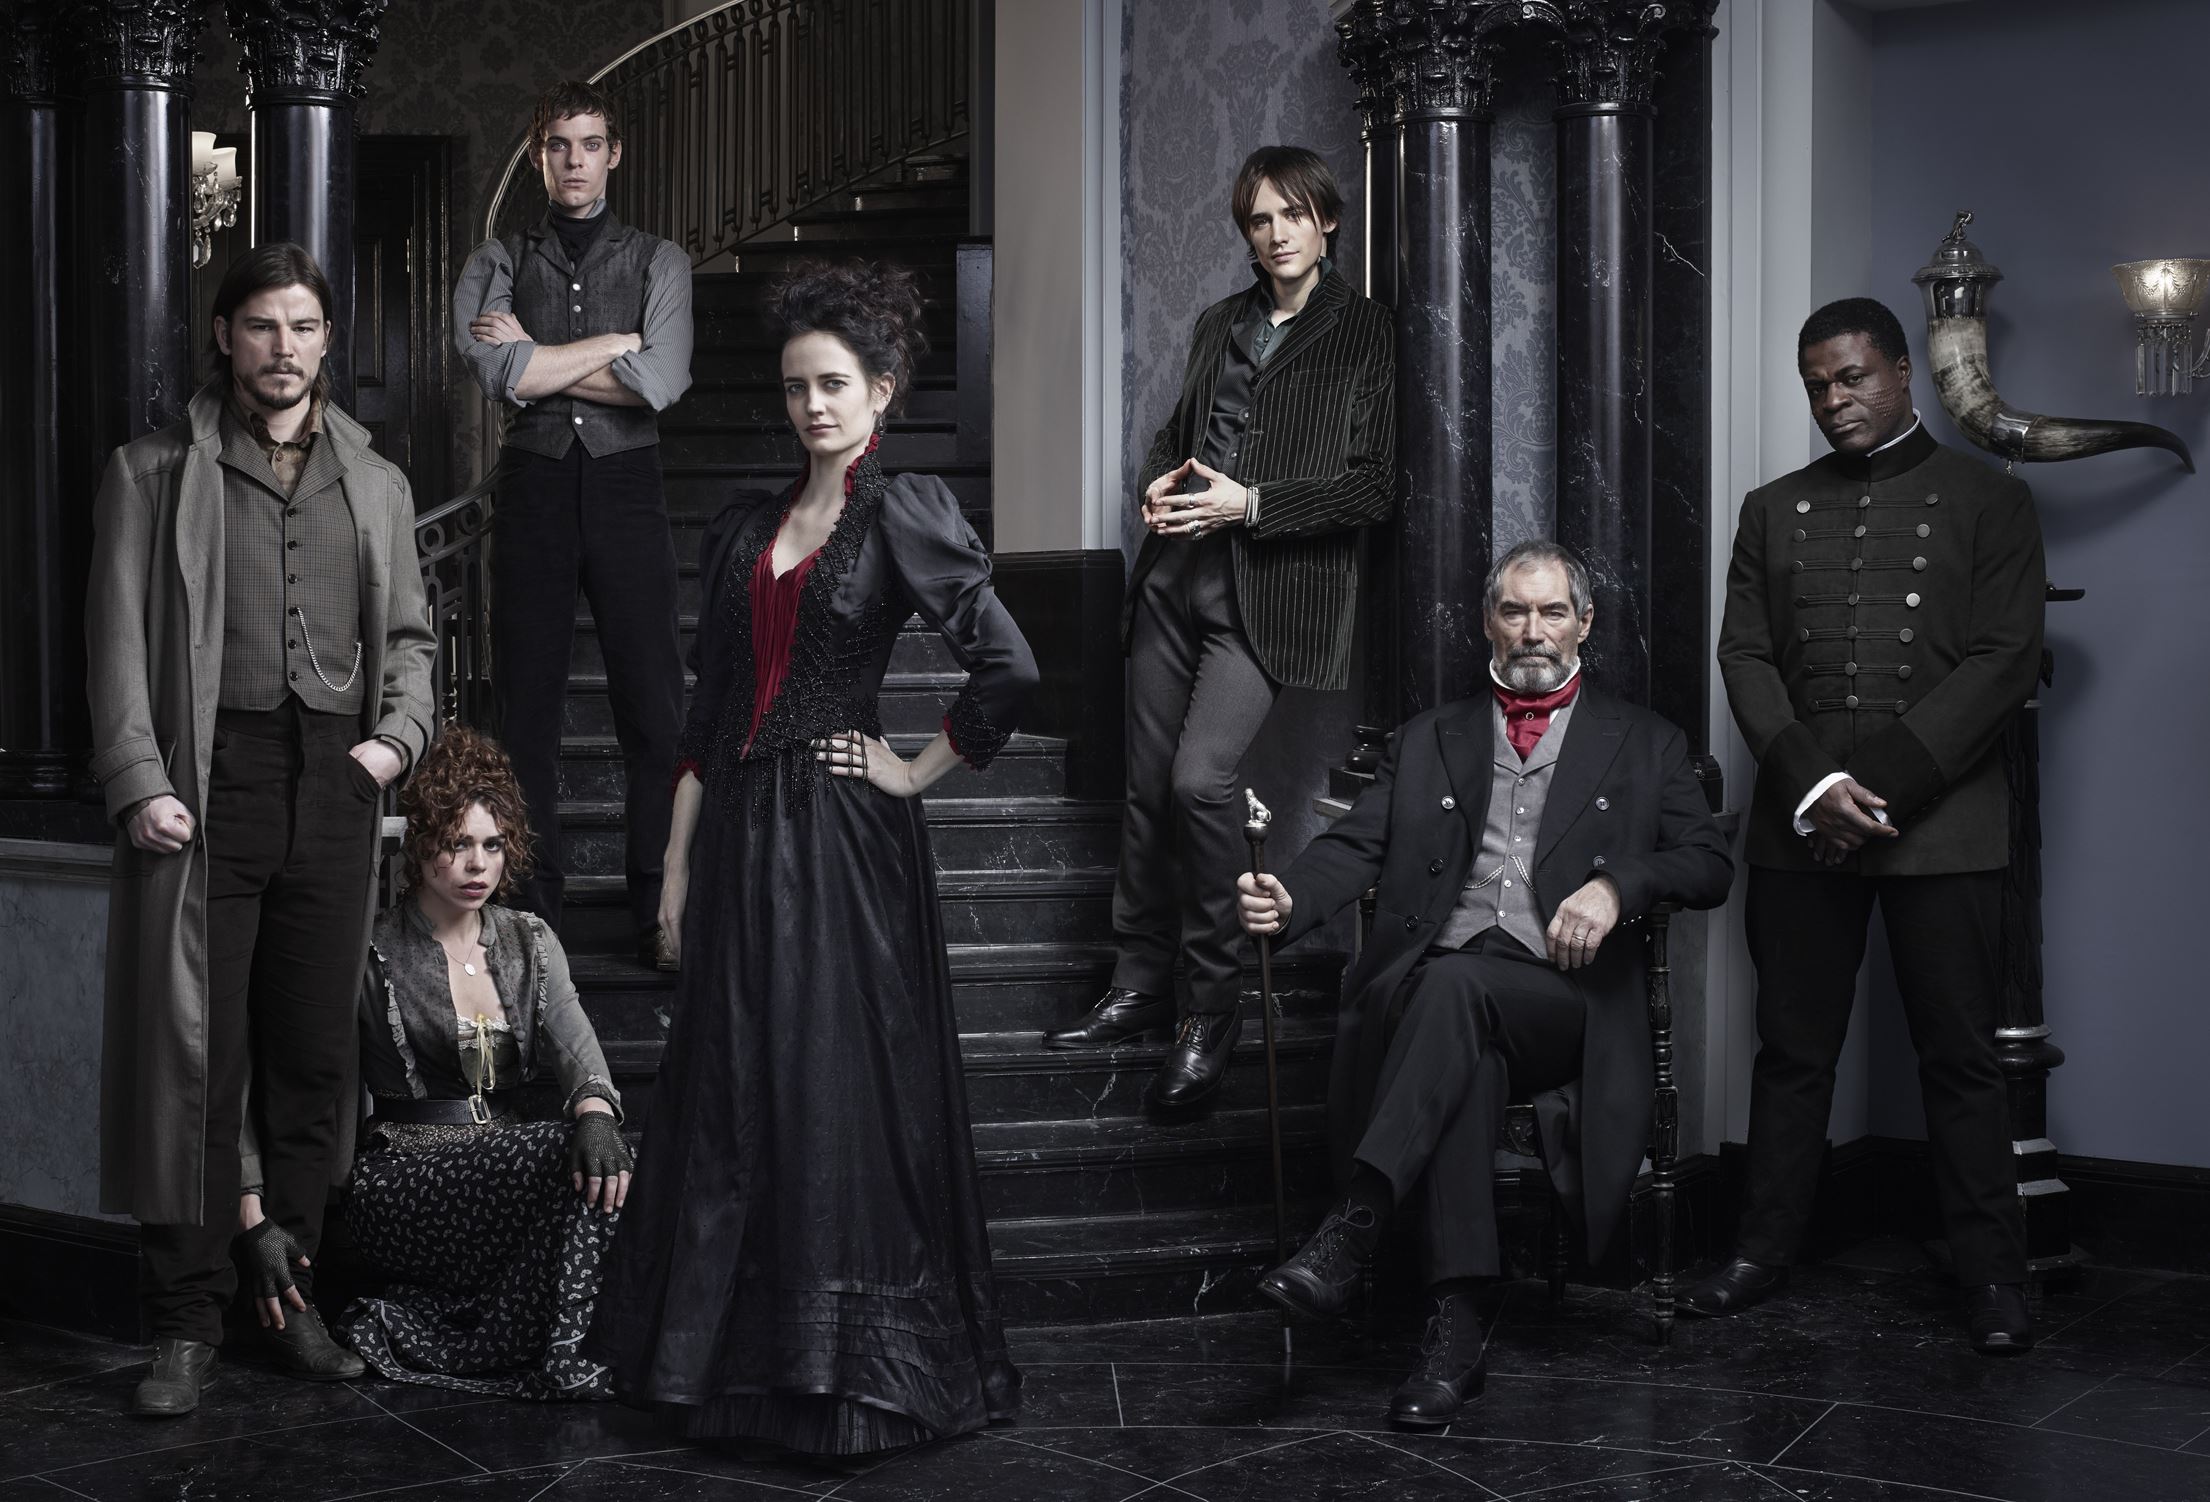 Penny Dreadful T1 Podcast – PREVIOUSLY ON S02E13